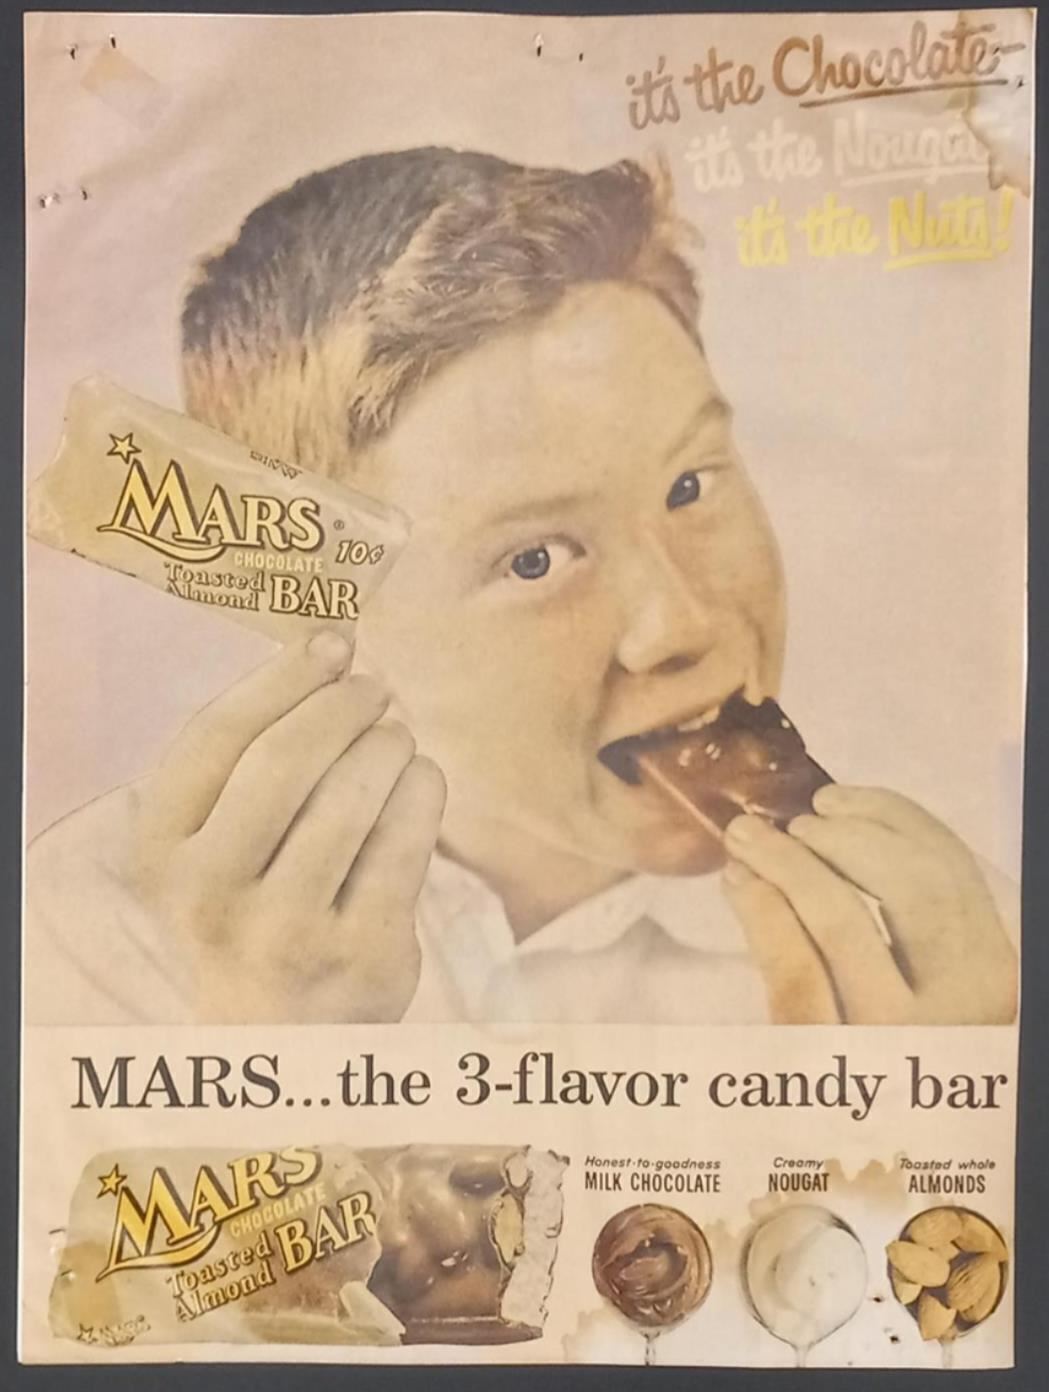 c1950 MARS THE 3-FLAVOR CANDY BAR PRINT AD VINTAGE ADVERTISMENT OS1